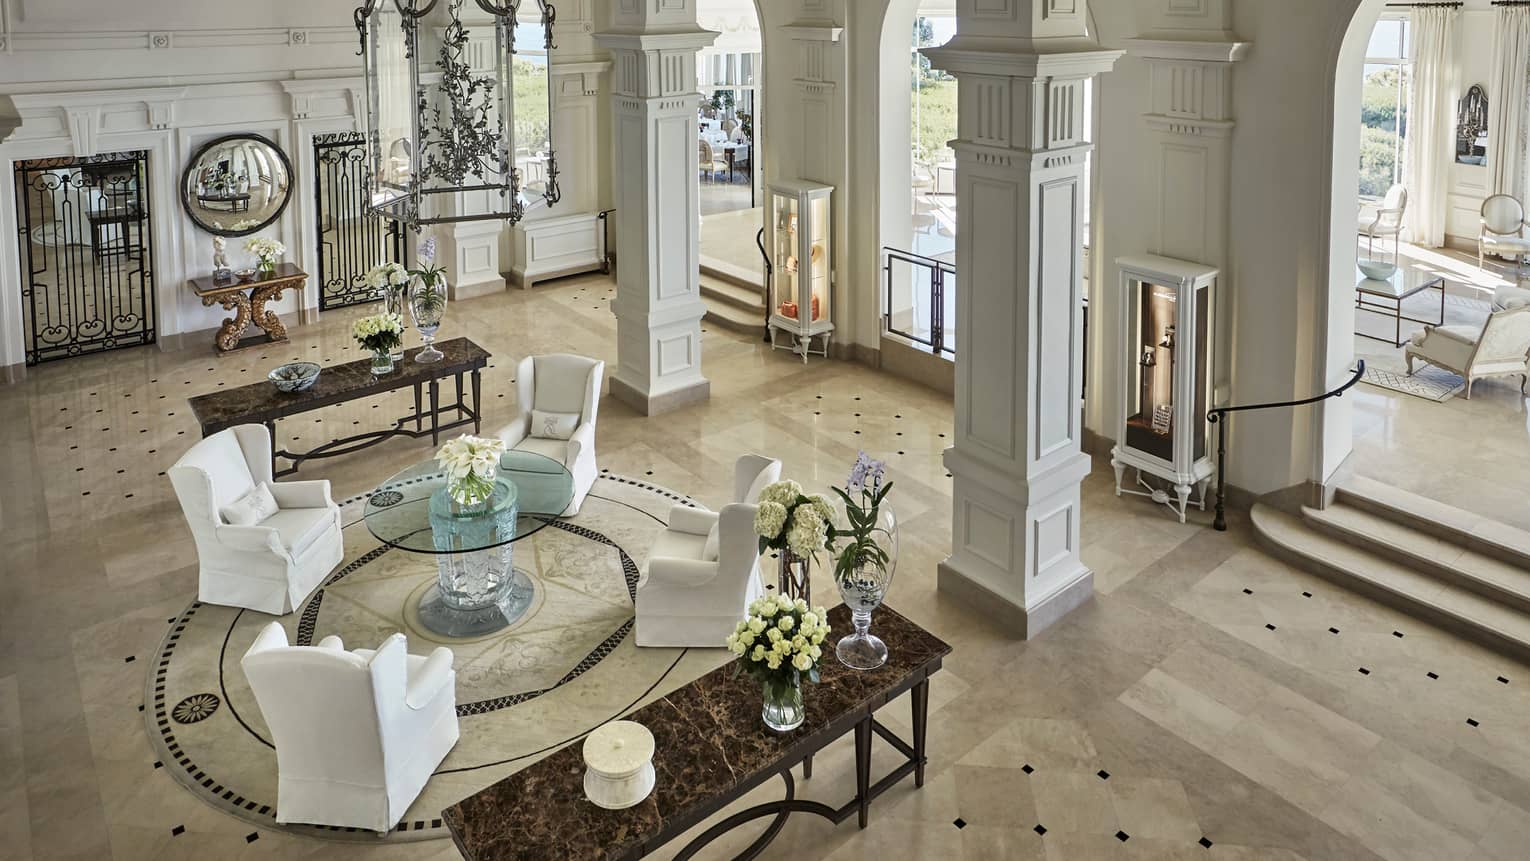 View of bright, palatial hotel lobby, white armchairs on marble floors under pillars